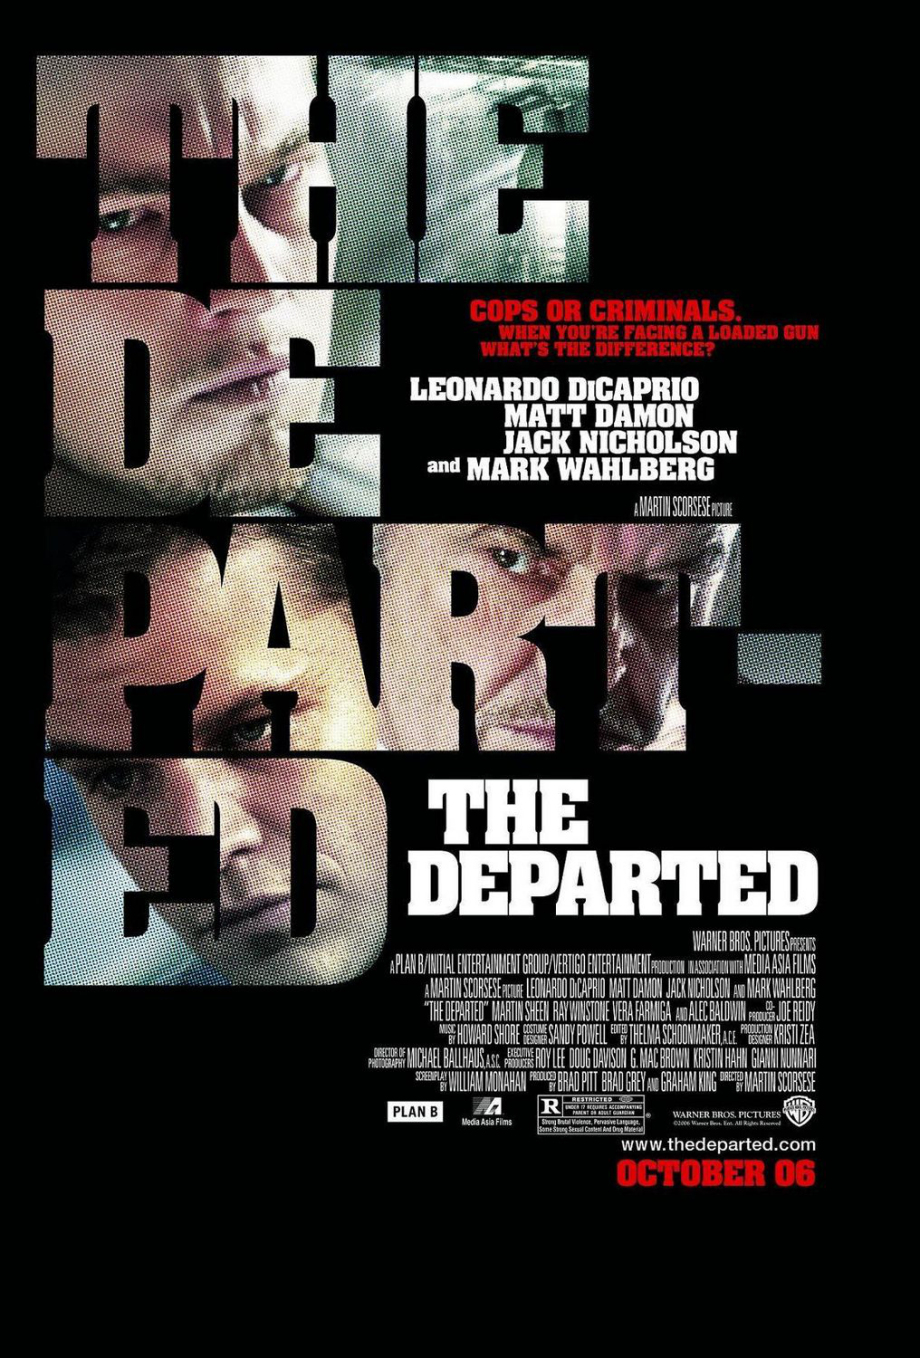 2006: The Departed — 8.5